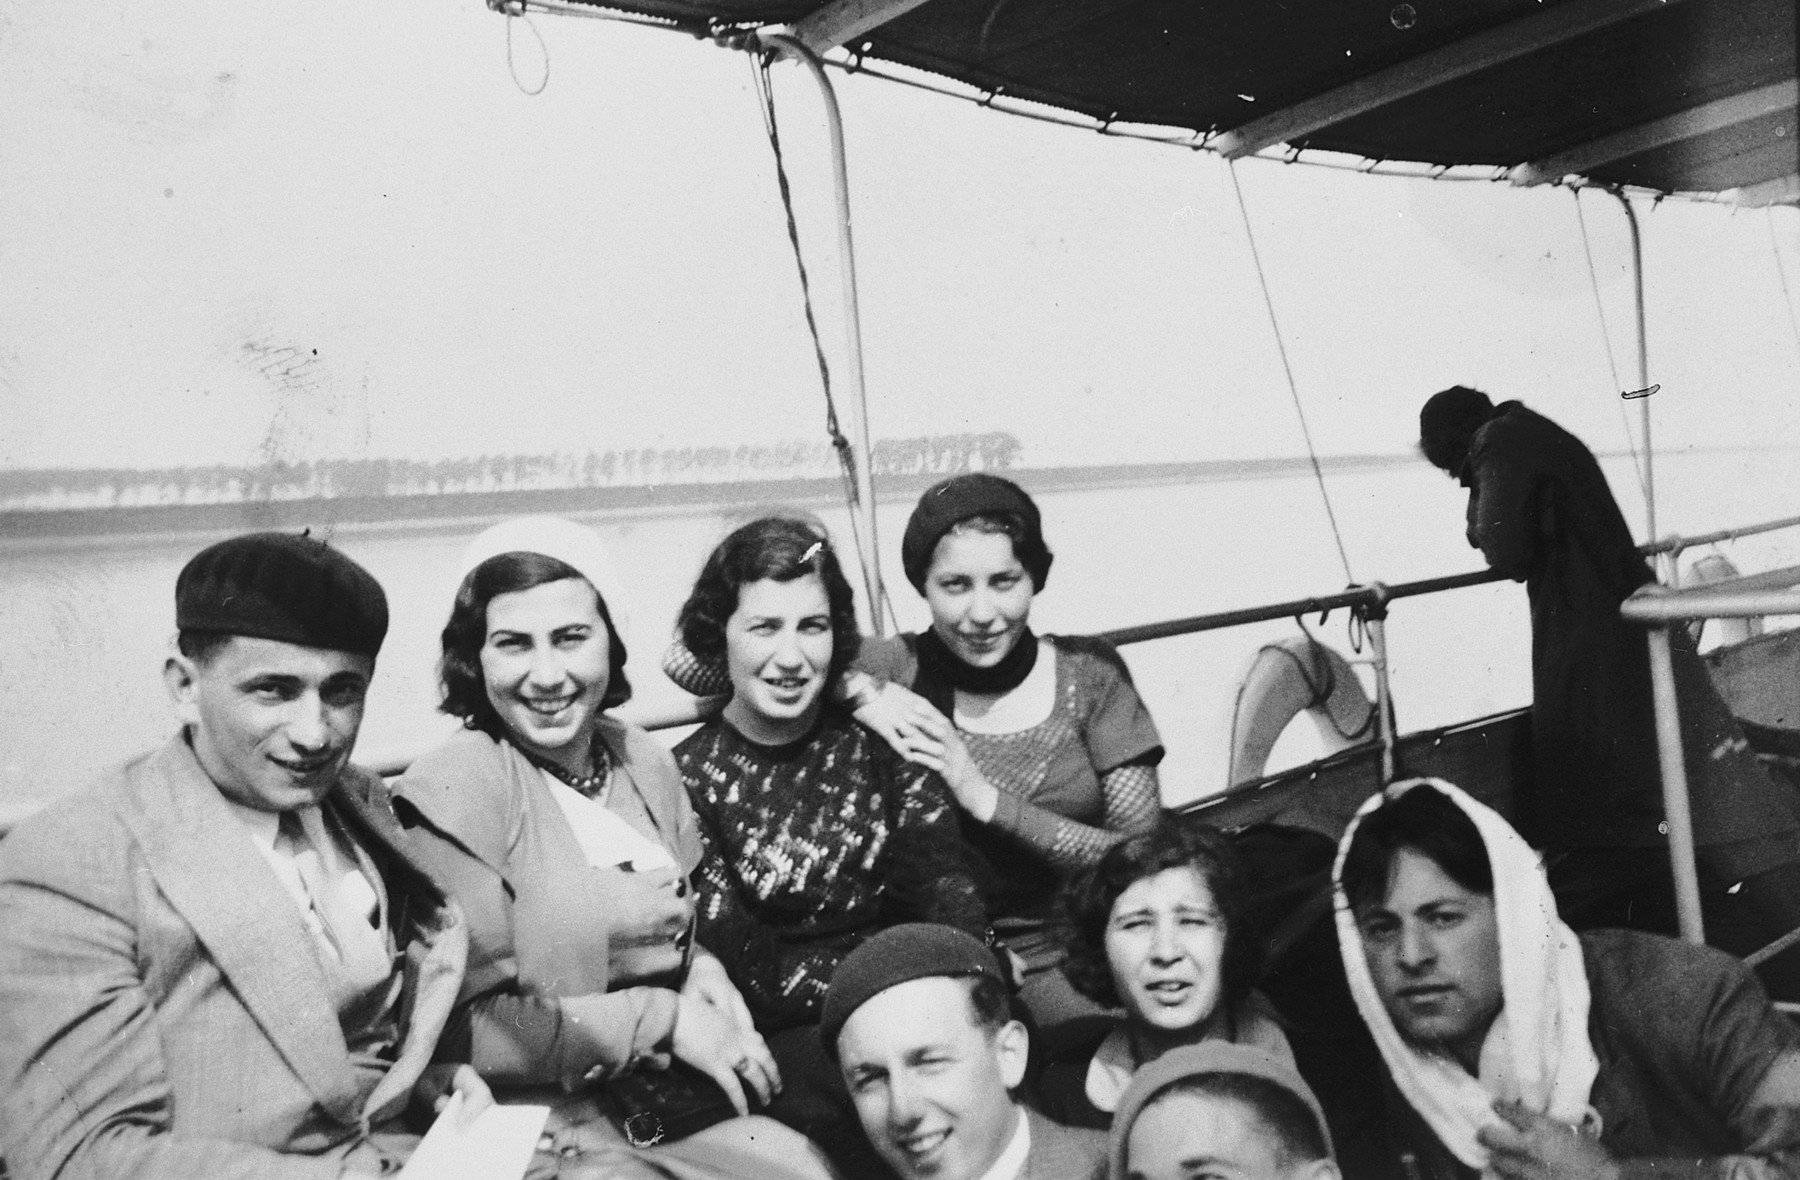 [Students from the Institute of Art in Brussels] enjoy an excursion on a pleasure boat.

Among those pictured are Esther Lurie.